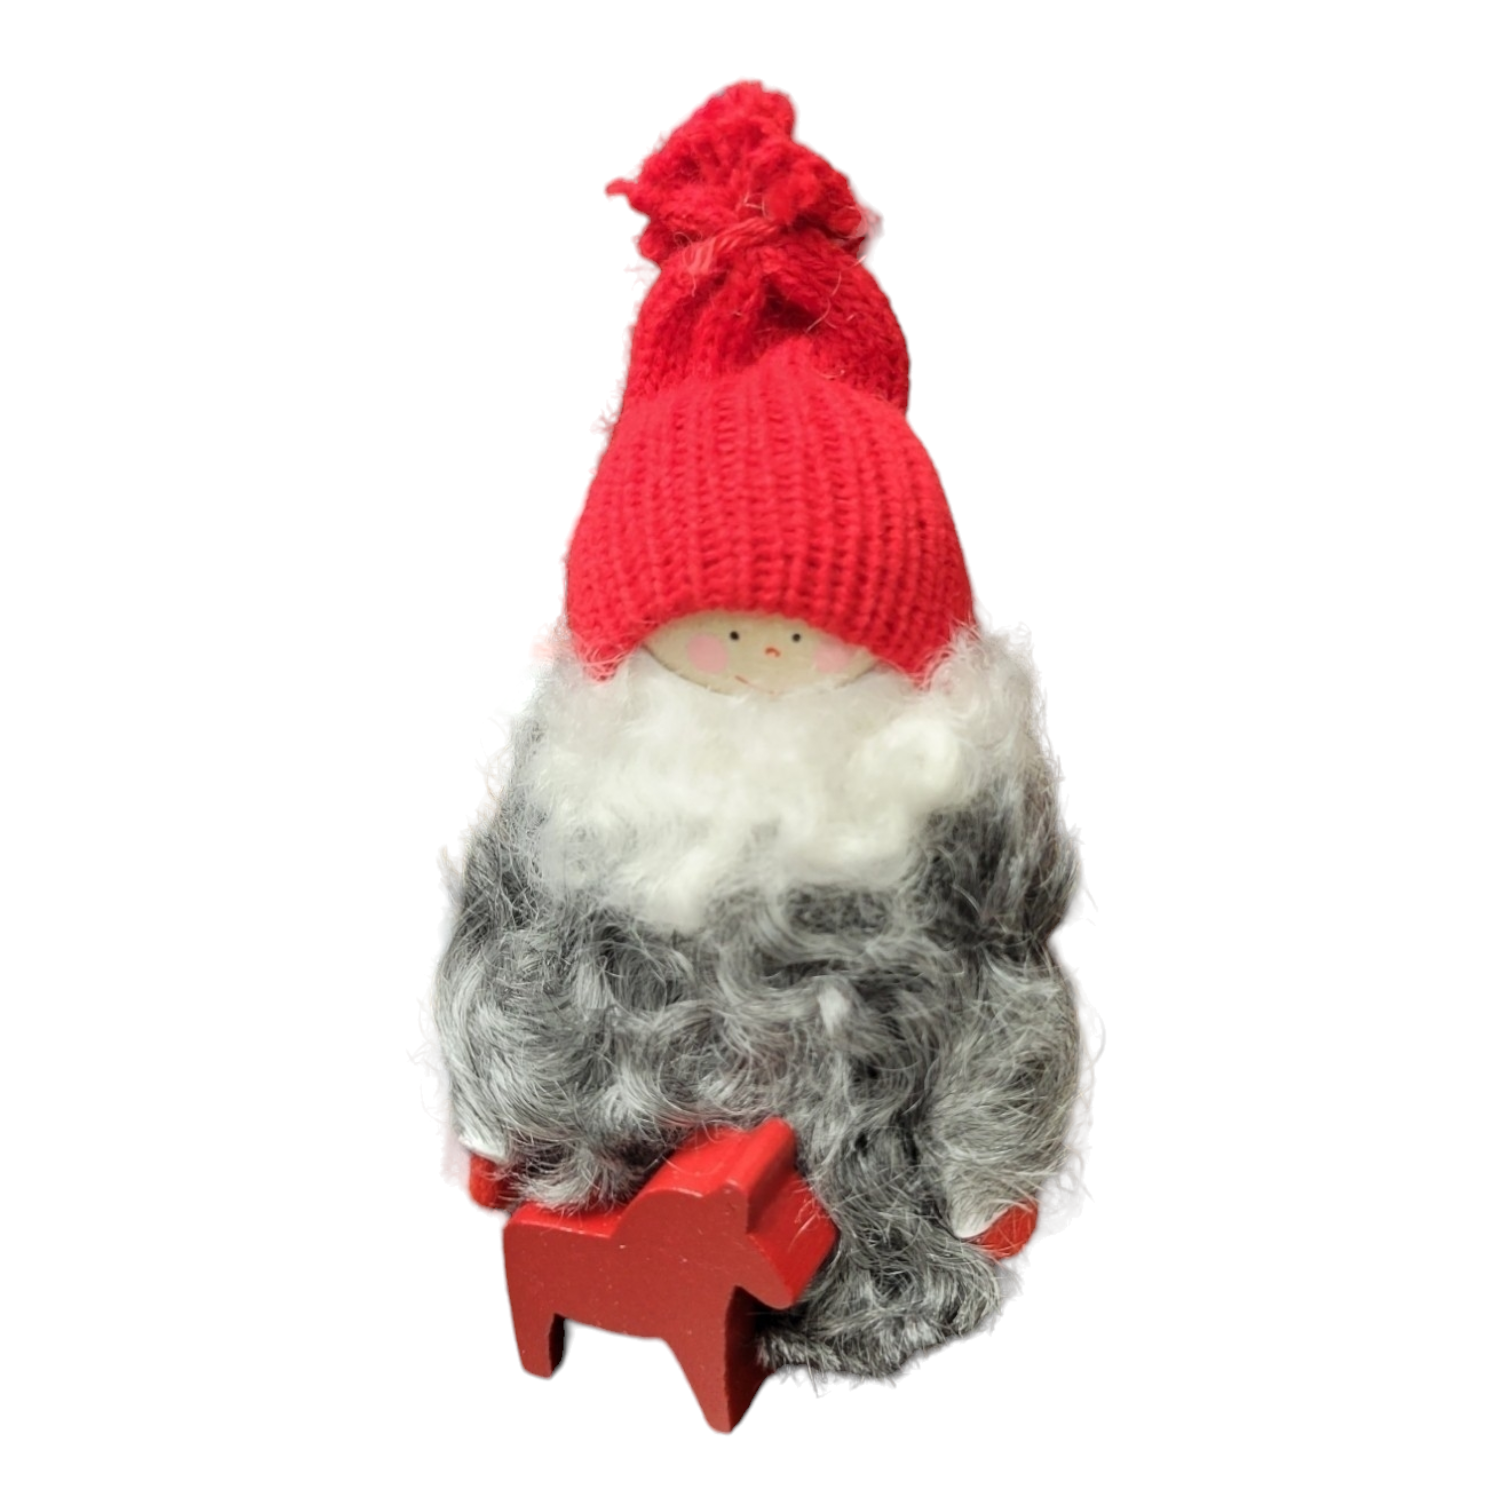 Figurine: Tomte with Red Dala Horse